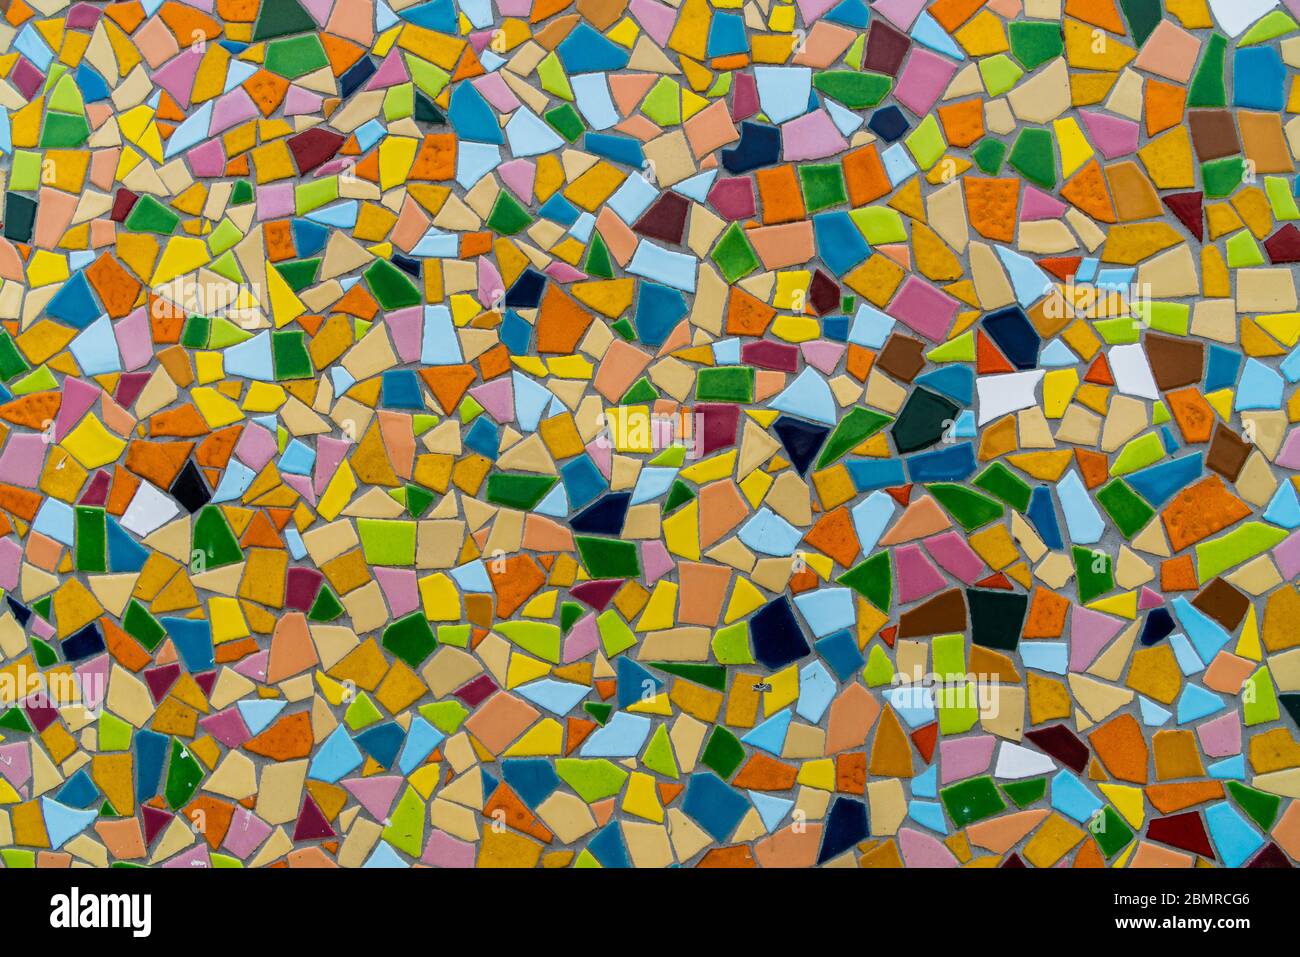 Pattern texture of colorful small mosaic tiles on the wall. Stock Photo